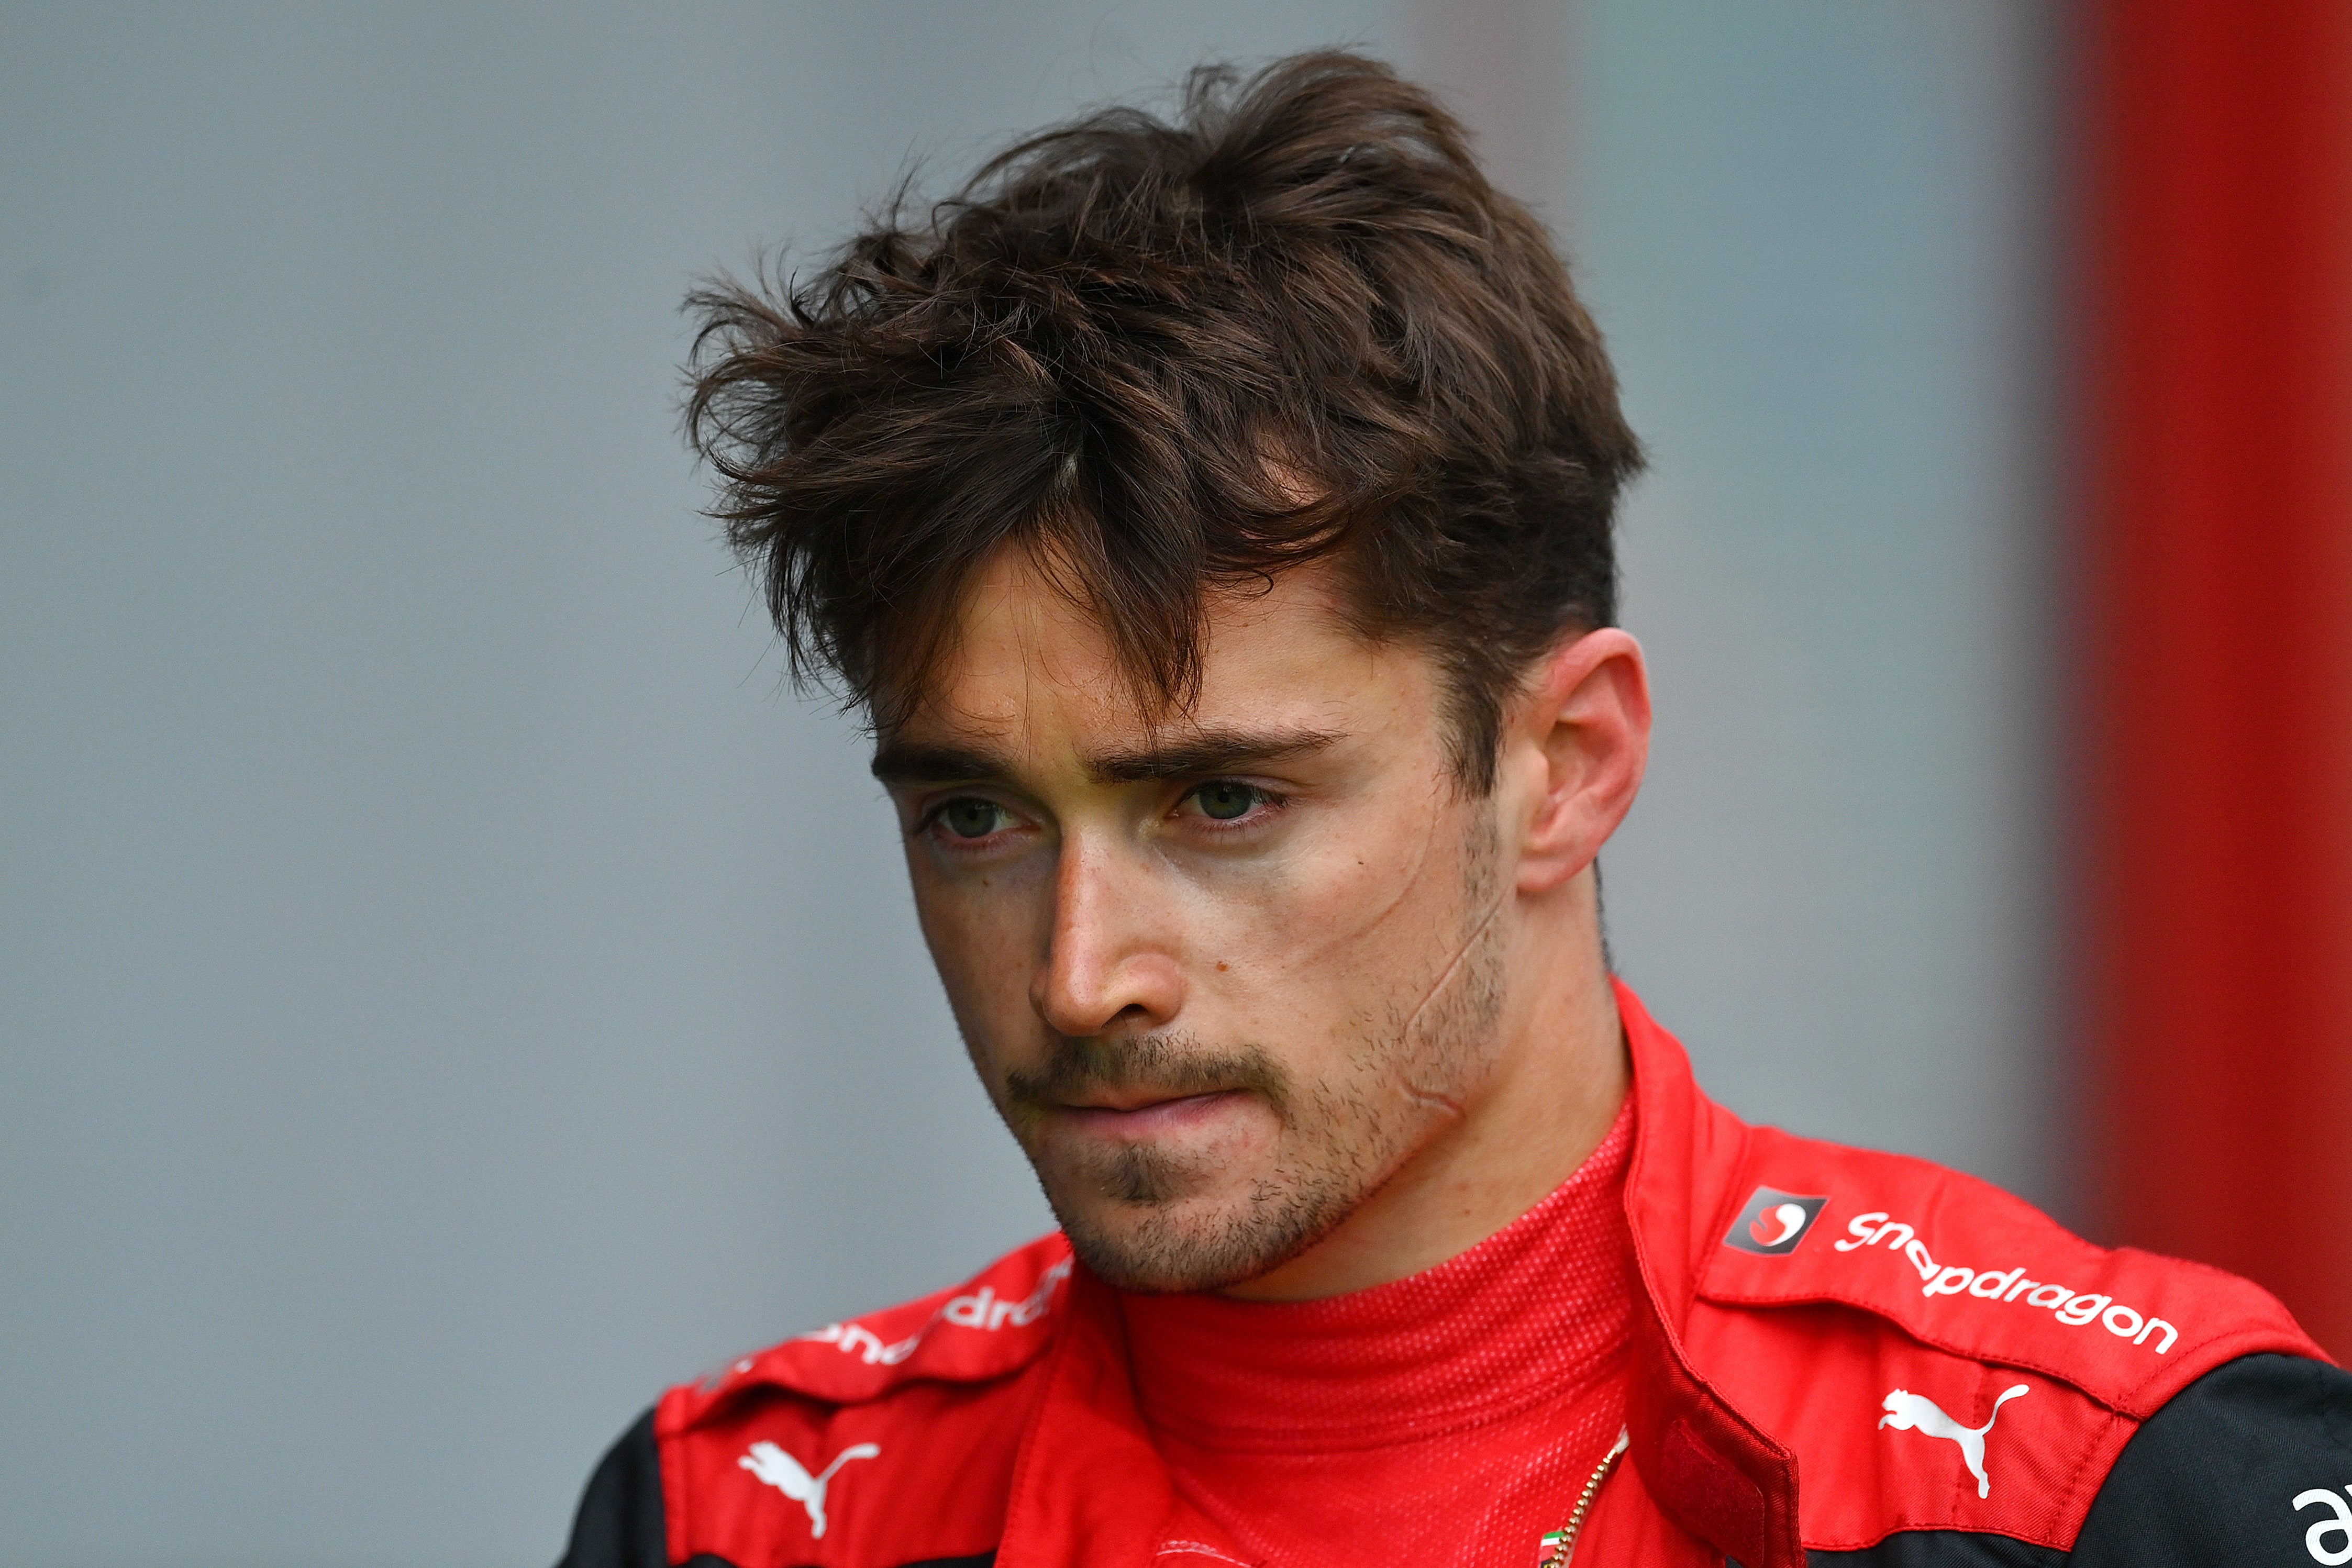 Charles Leclerc is leading the driver standings